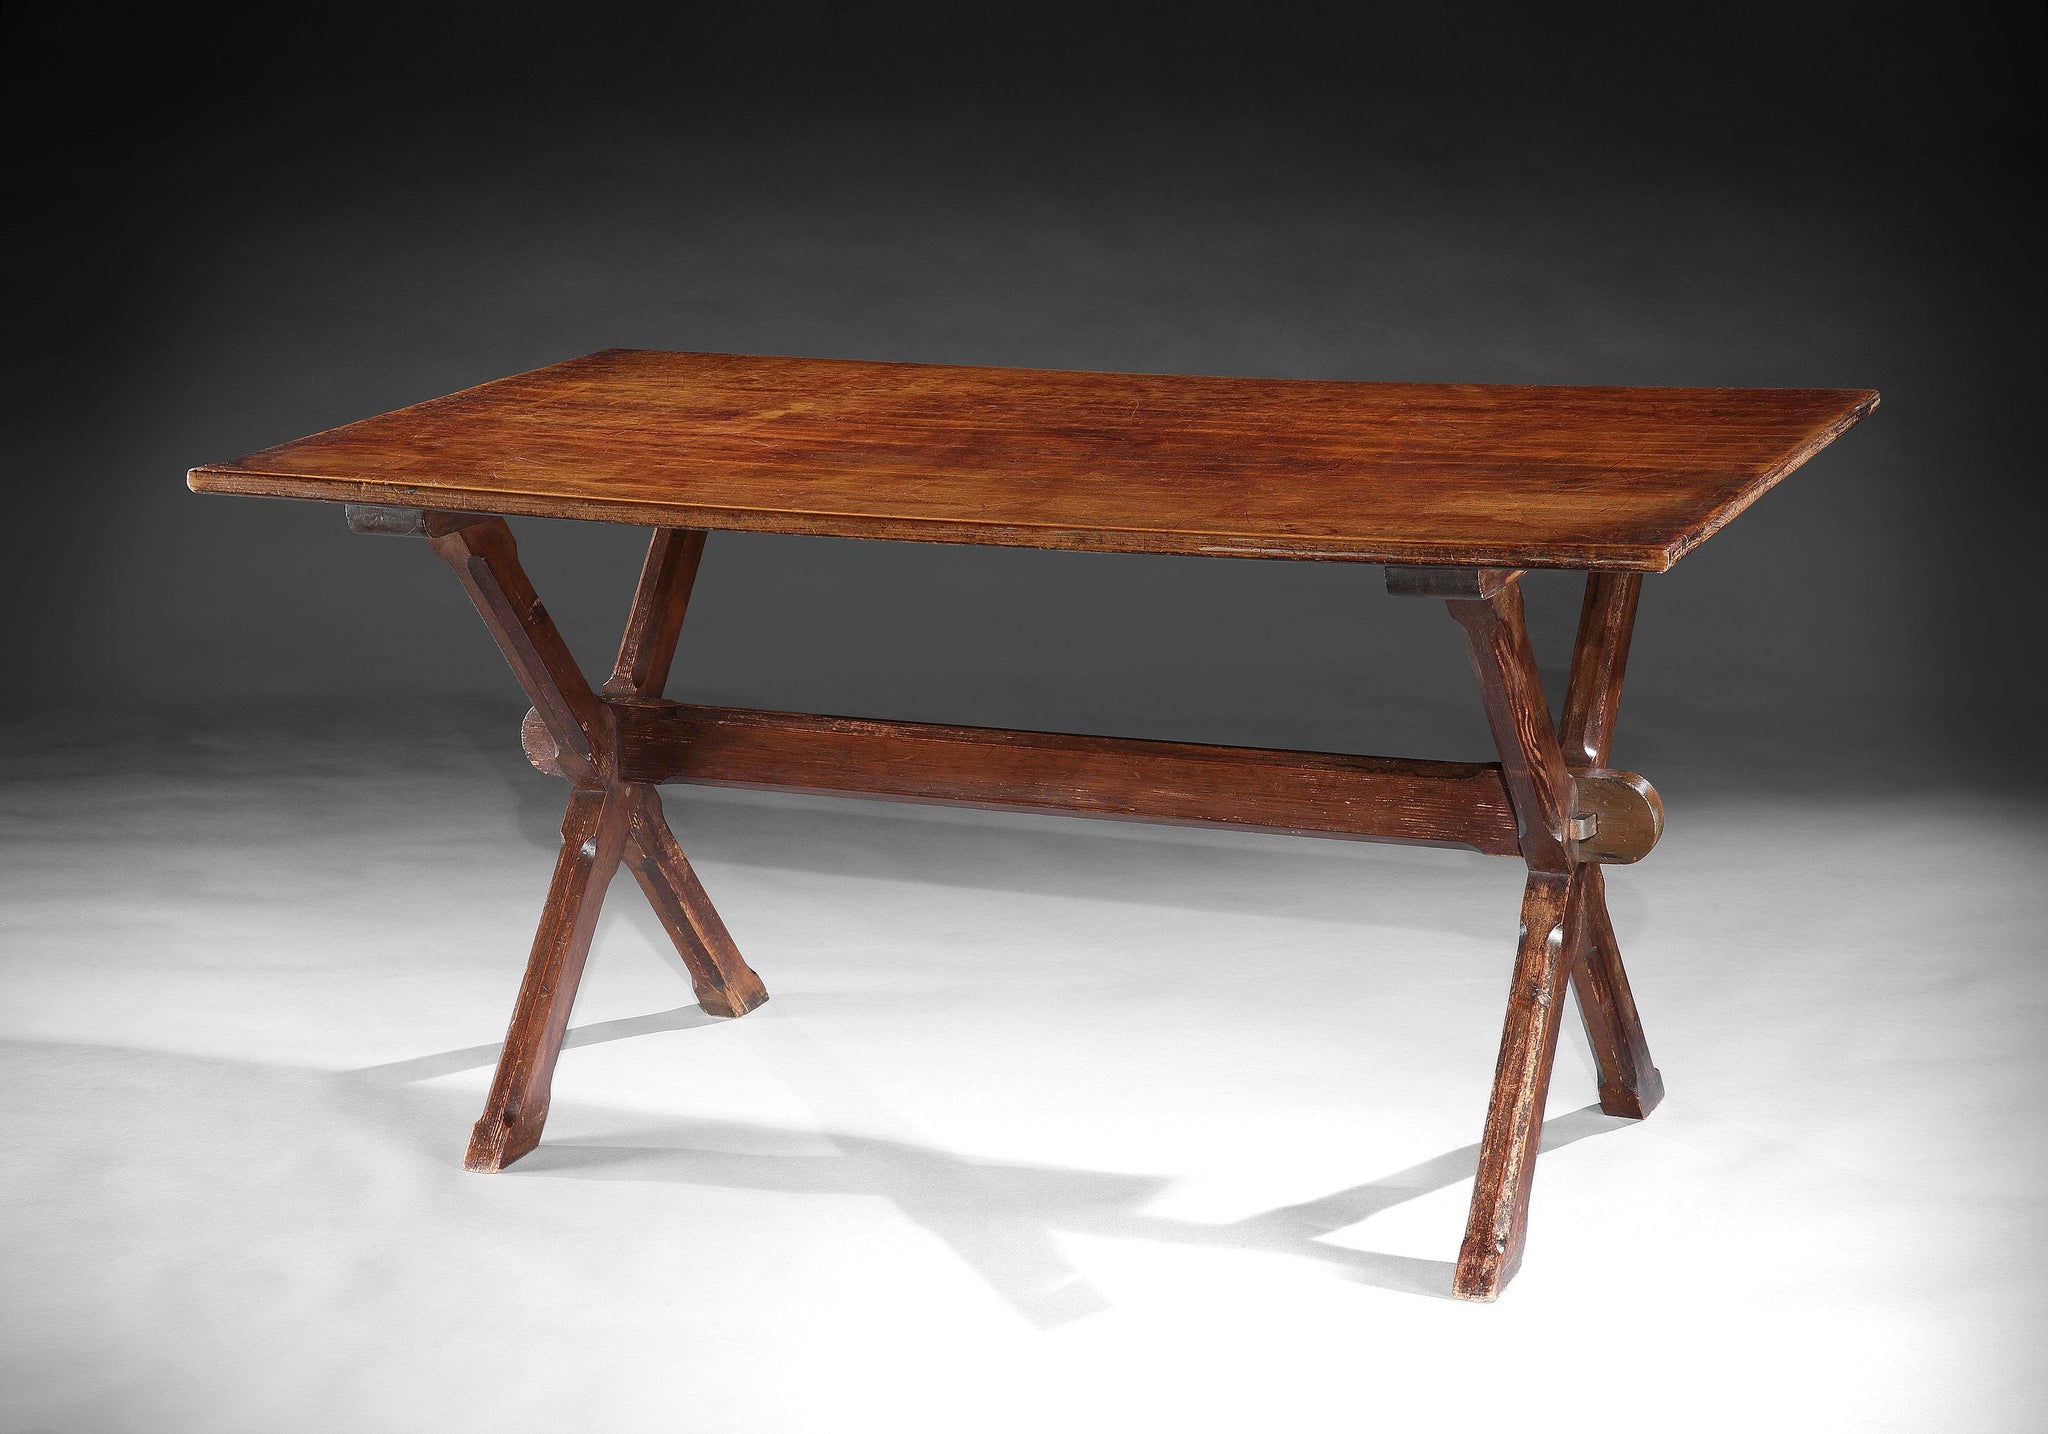 Generously Proportioned Traditional "X" Frame Tavern Table